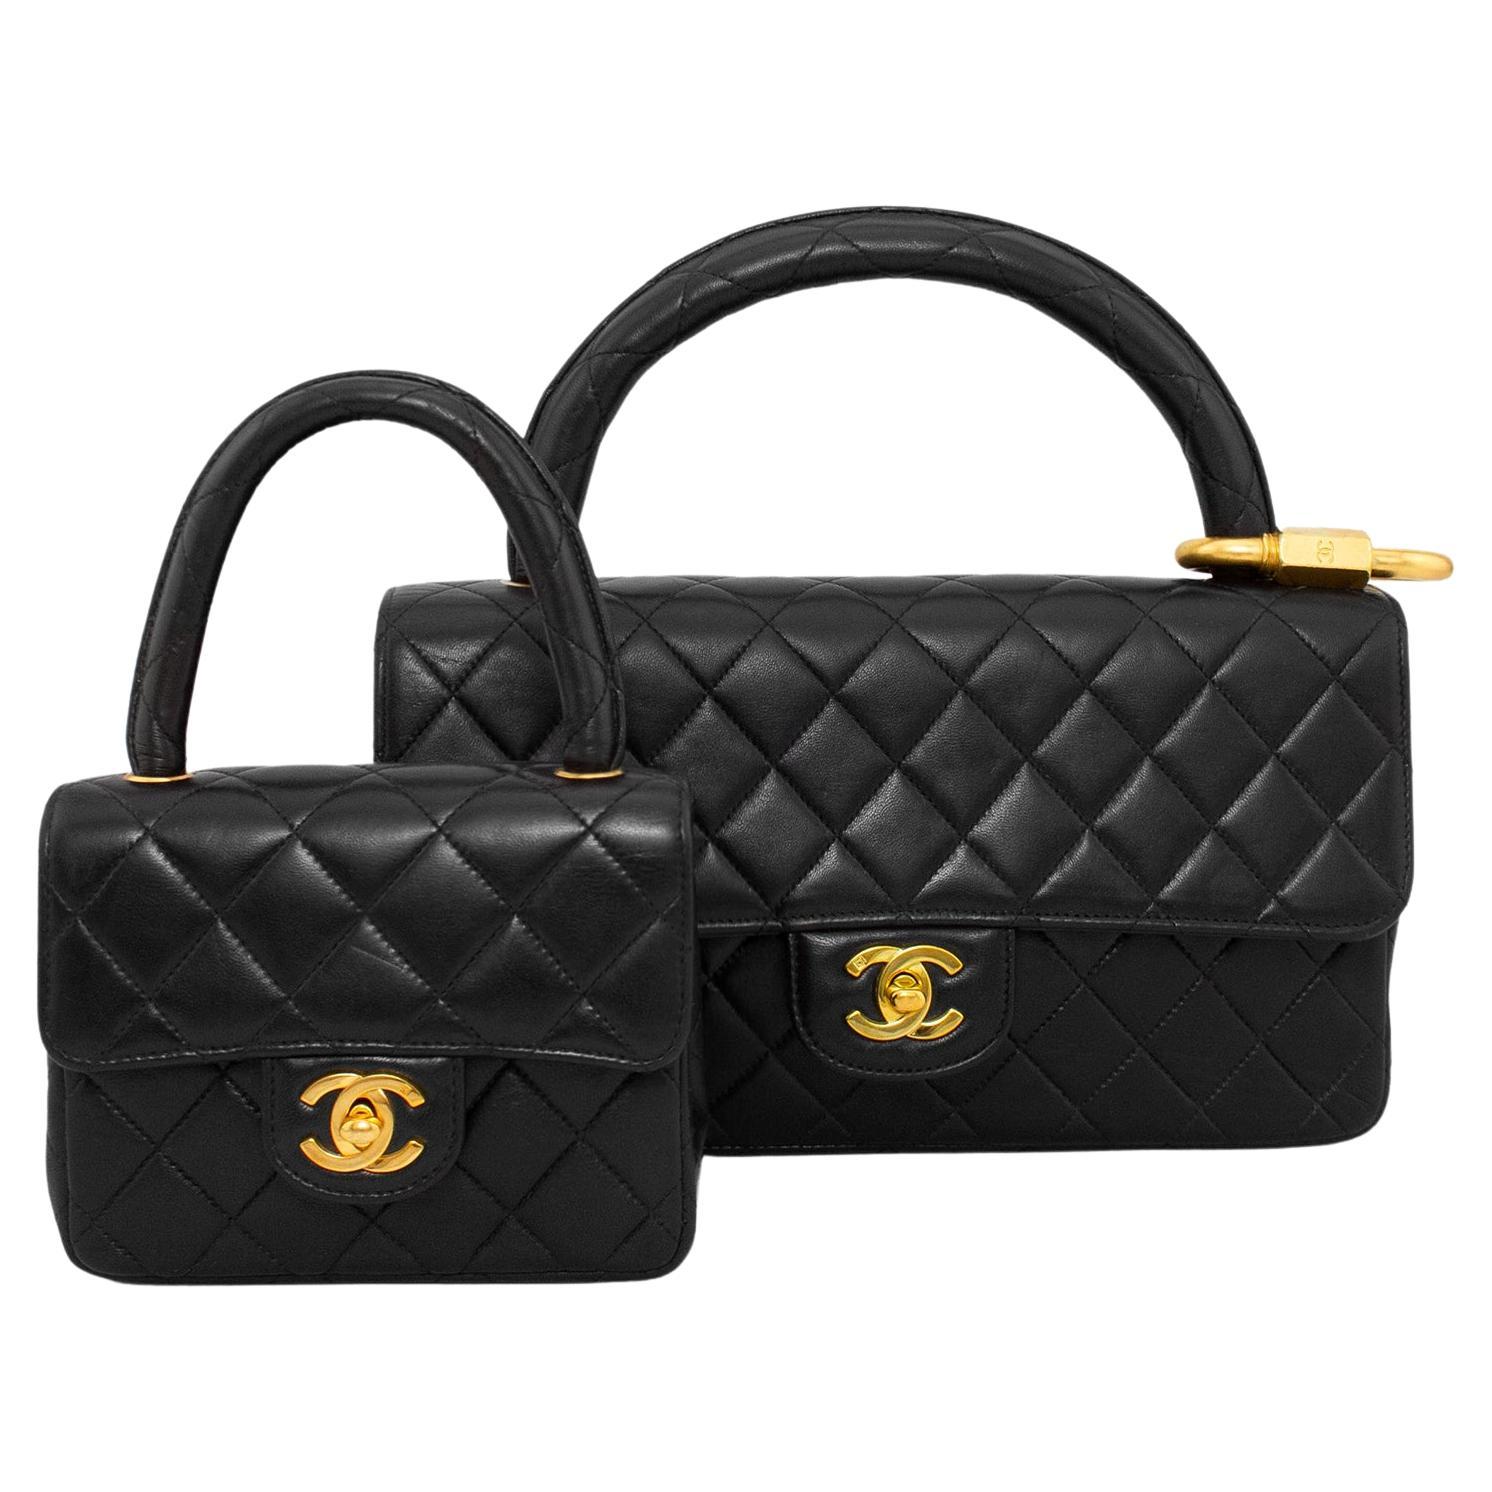 More is more! This set of Chanel medium and small twin bags from the 1990s is fabulous. Both bags are the quilted lambskin in the classic Chanel single flap shape. Leather top handles and gold tone metal cc logo twist locks. The medium has two